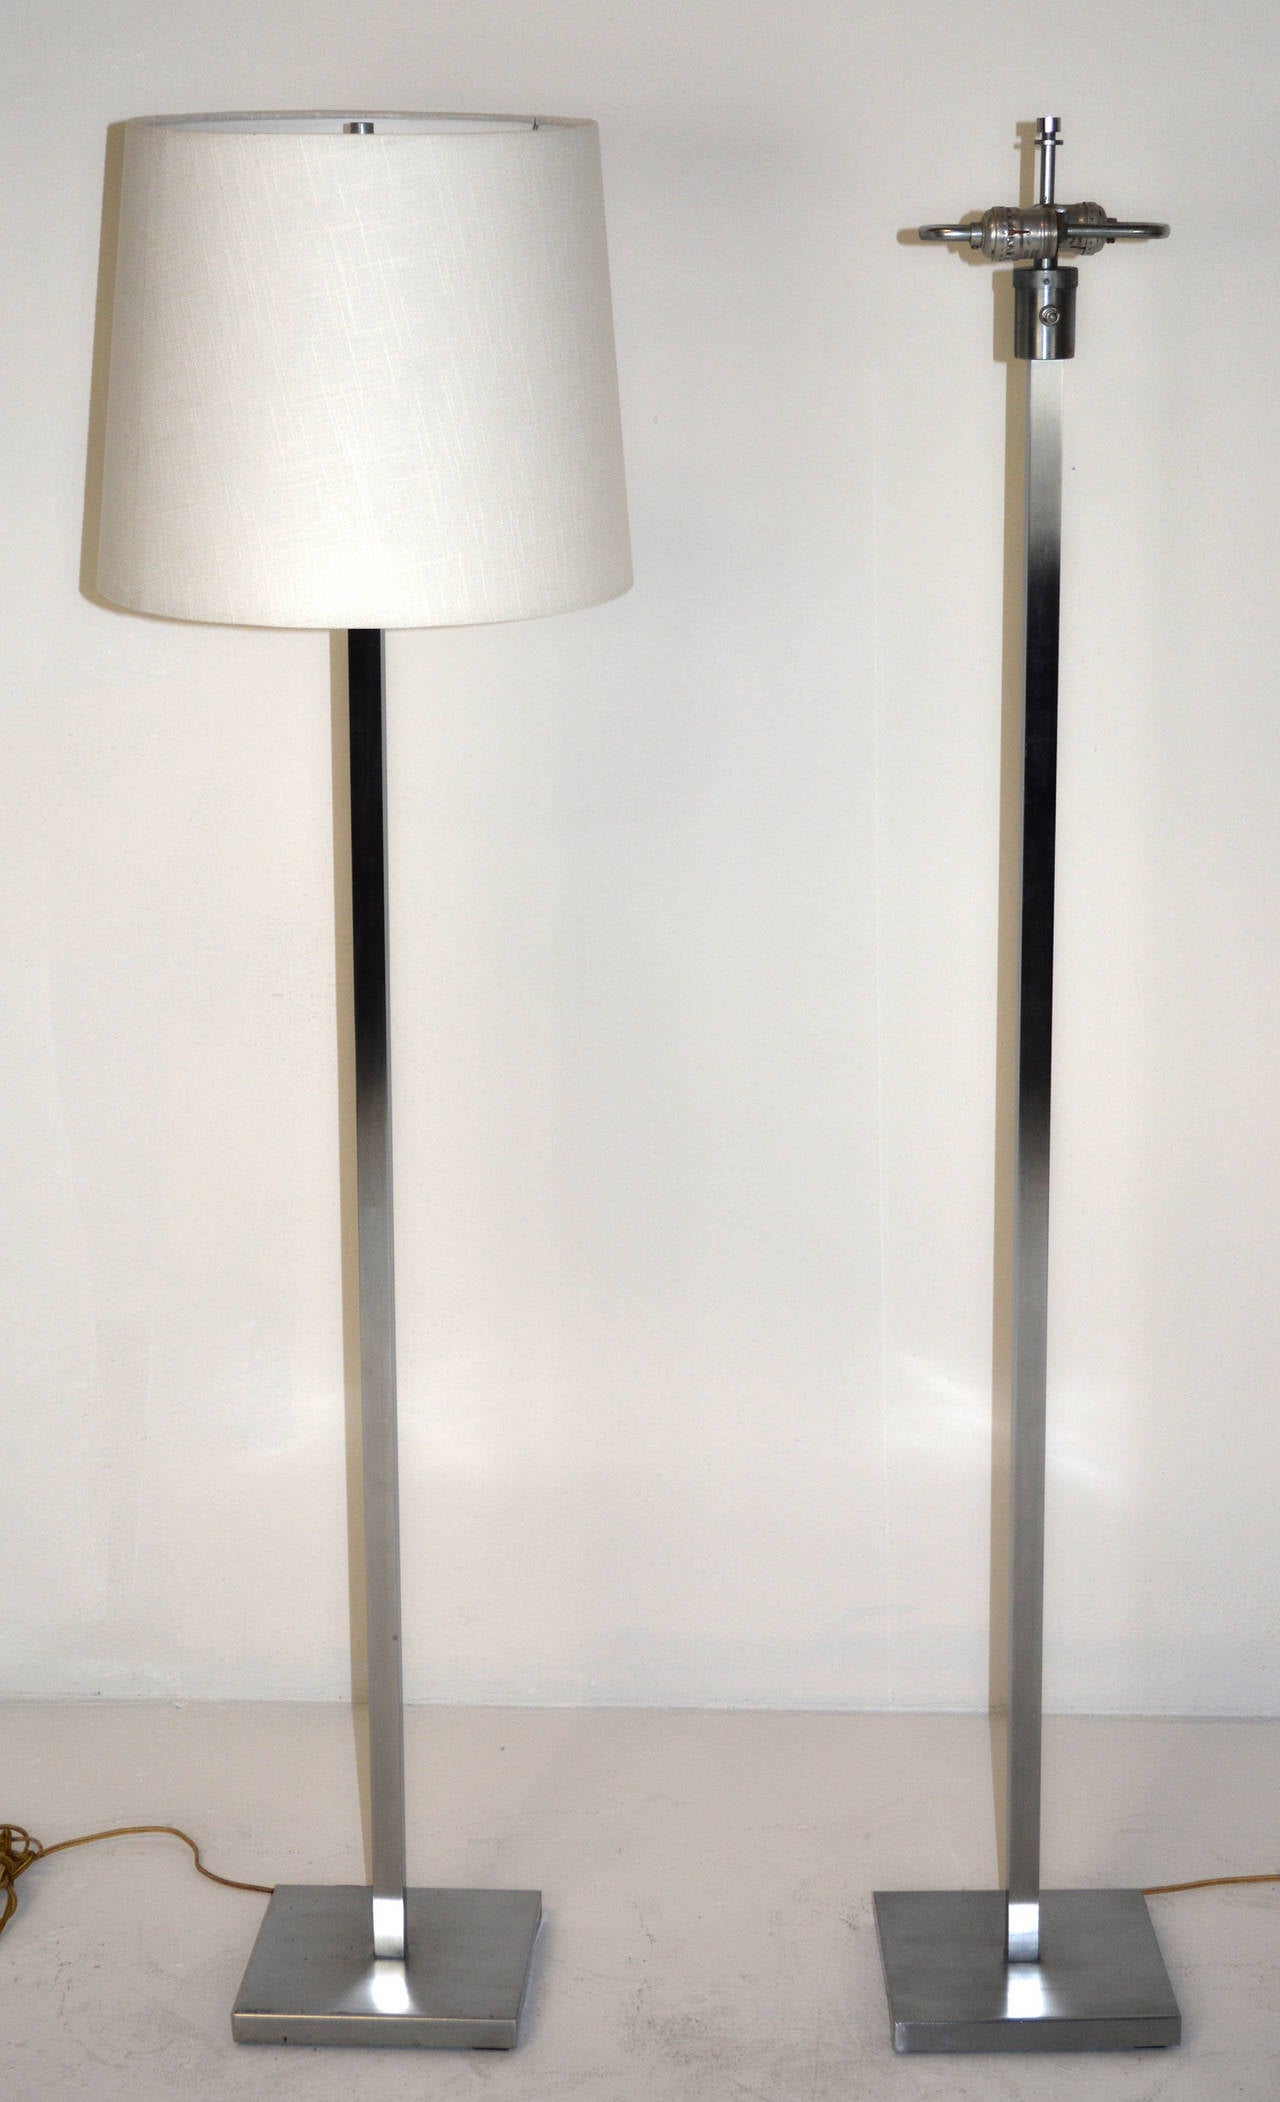 A pair of American floor lamps, mid-century, comprising a square aluminum shaft on a square base. Double sockets, with original finials. Shades for display only.